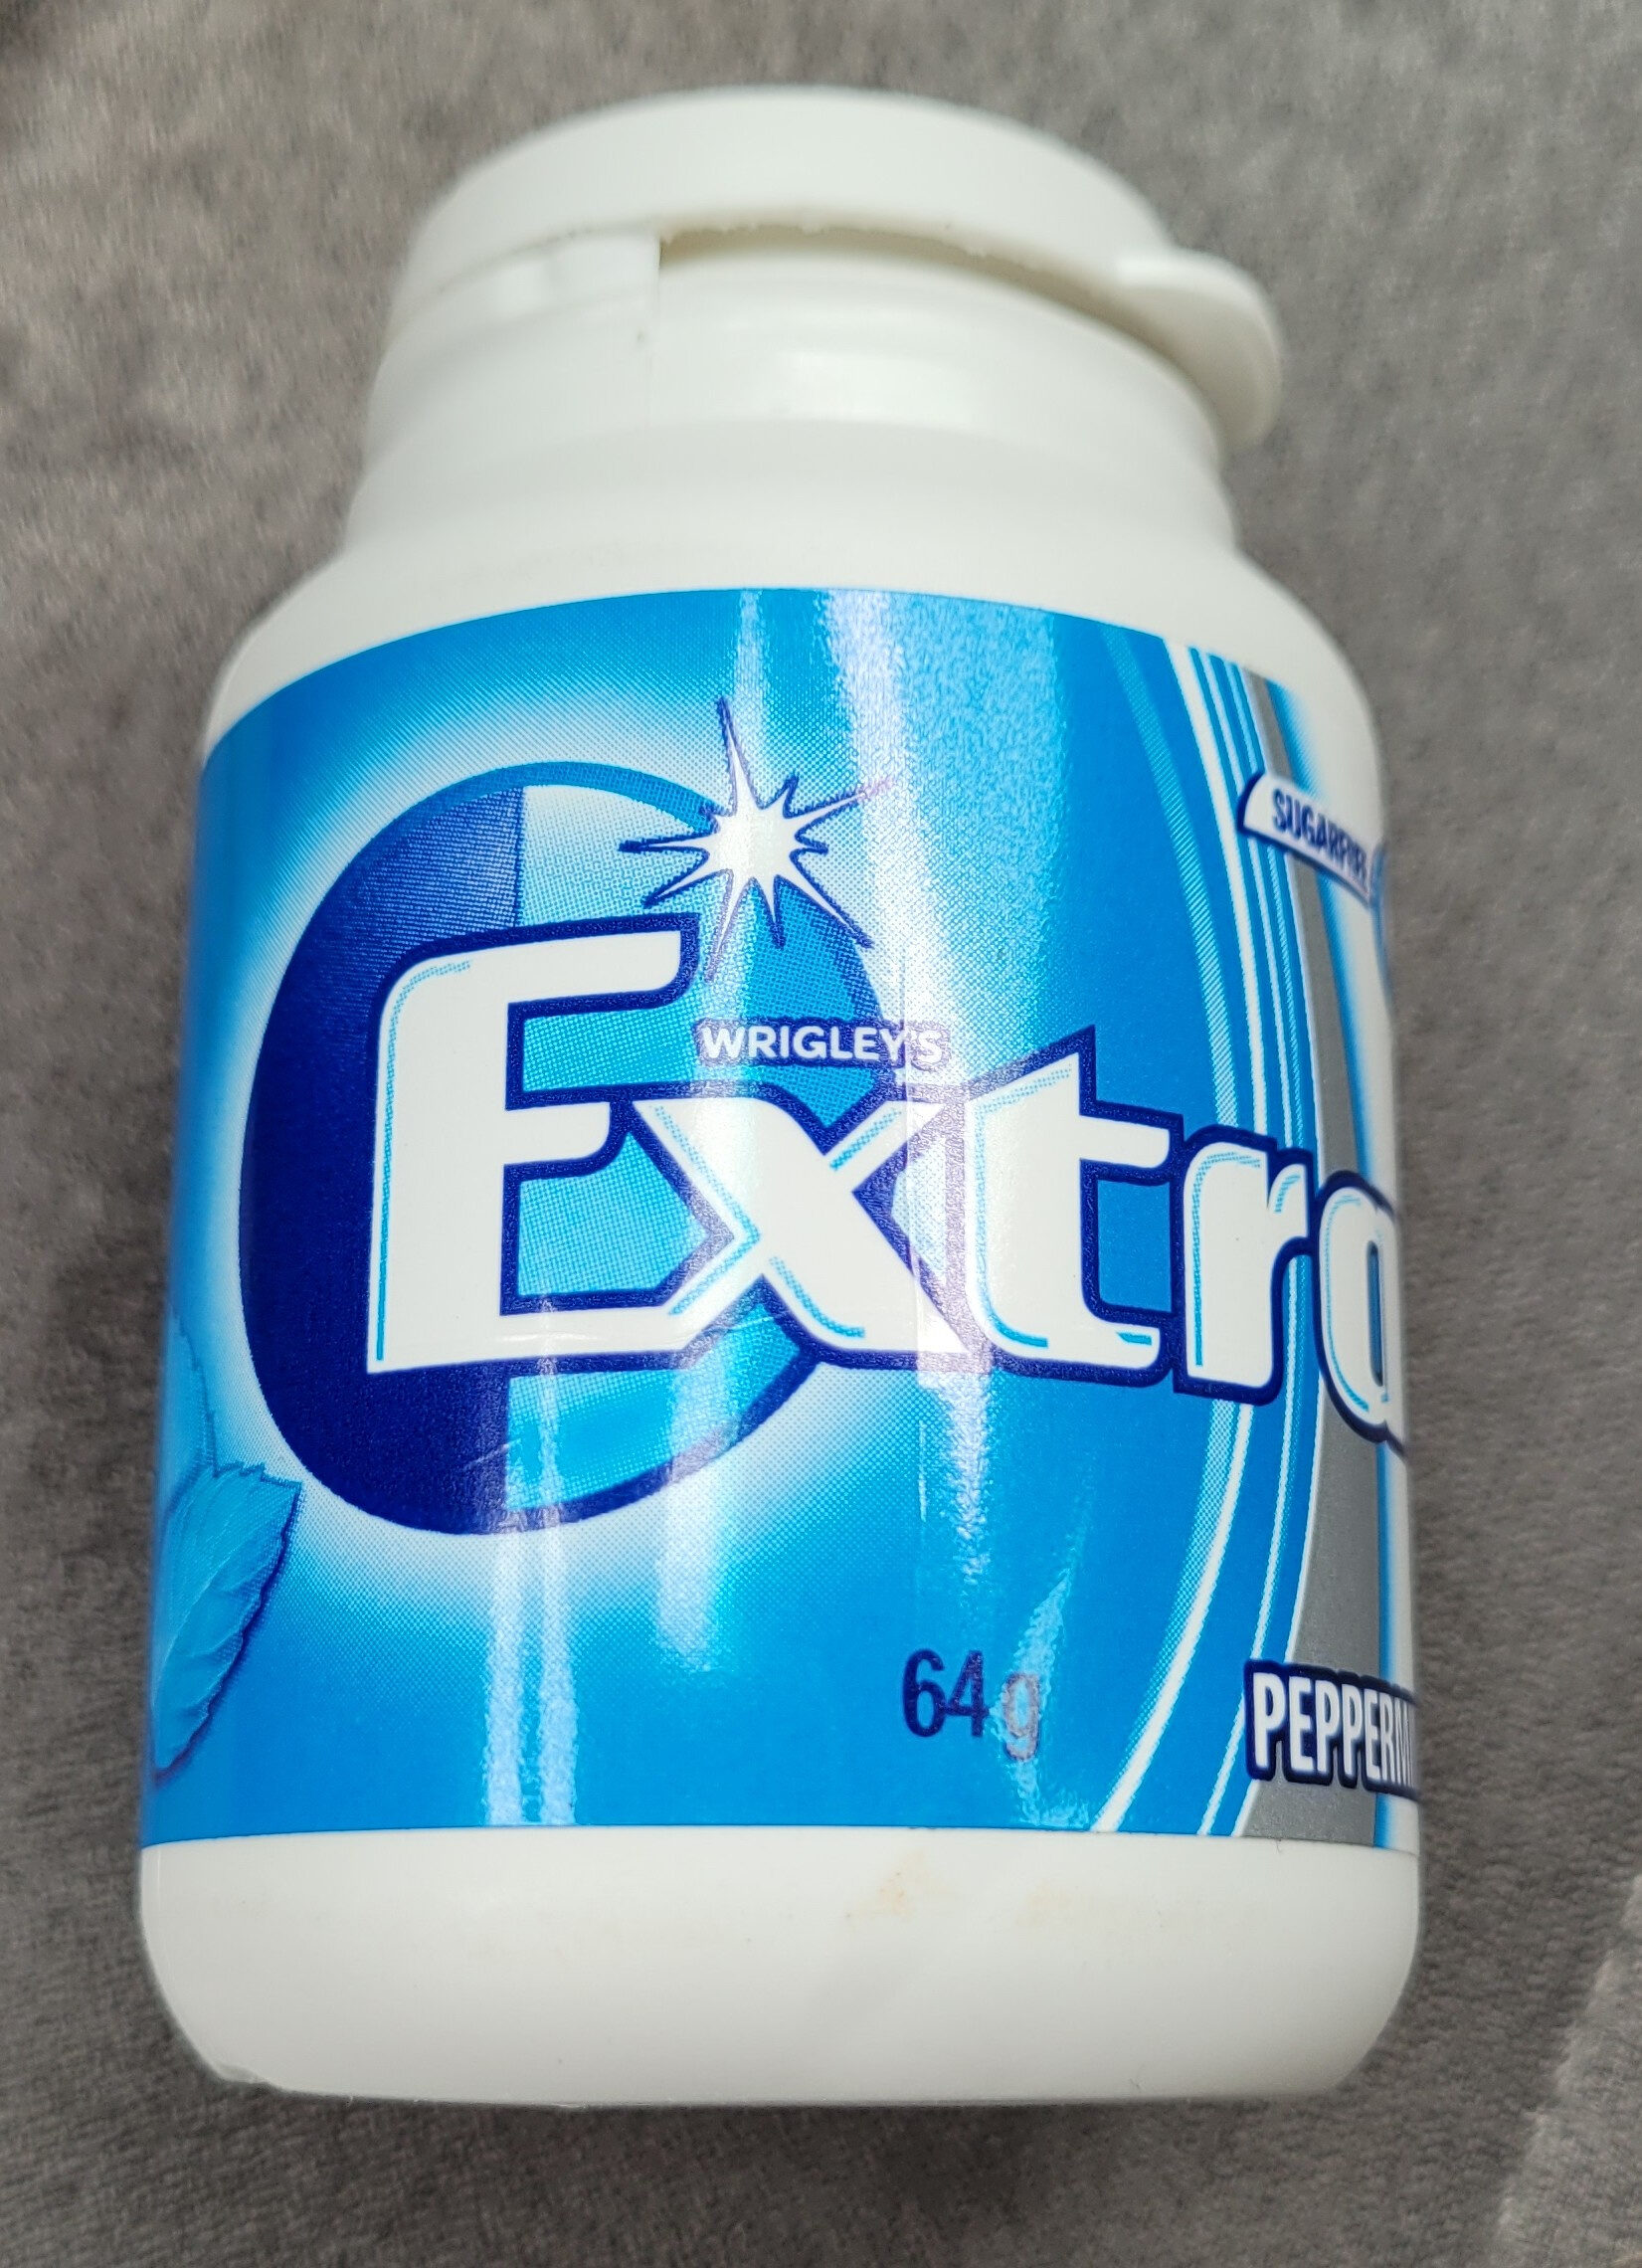 Wrigley's Extra Peppermint - Product - en